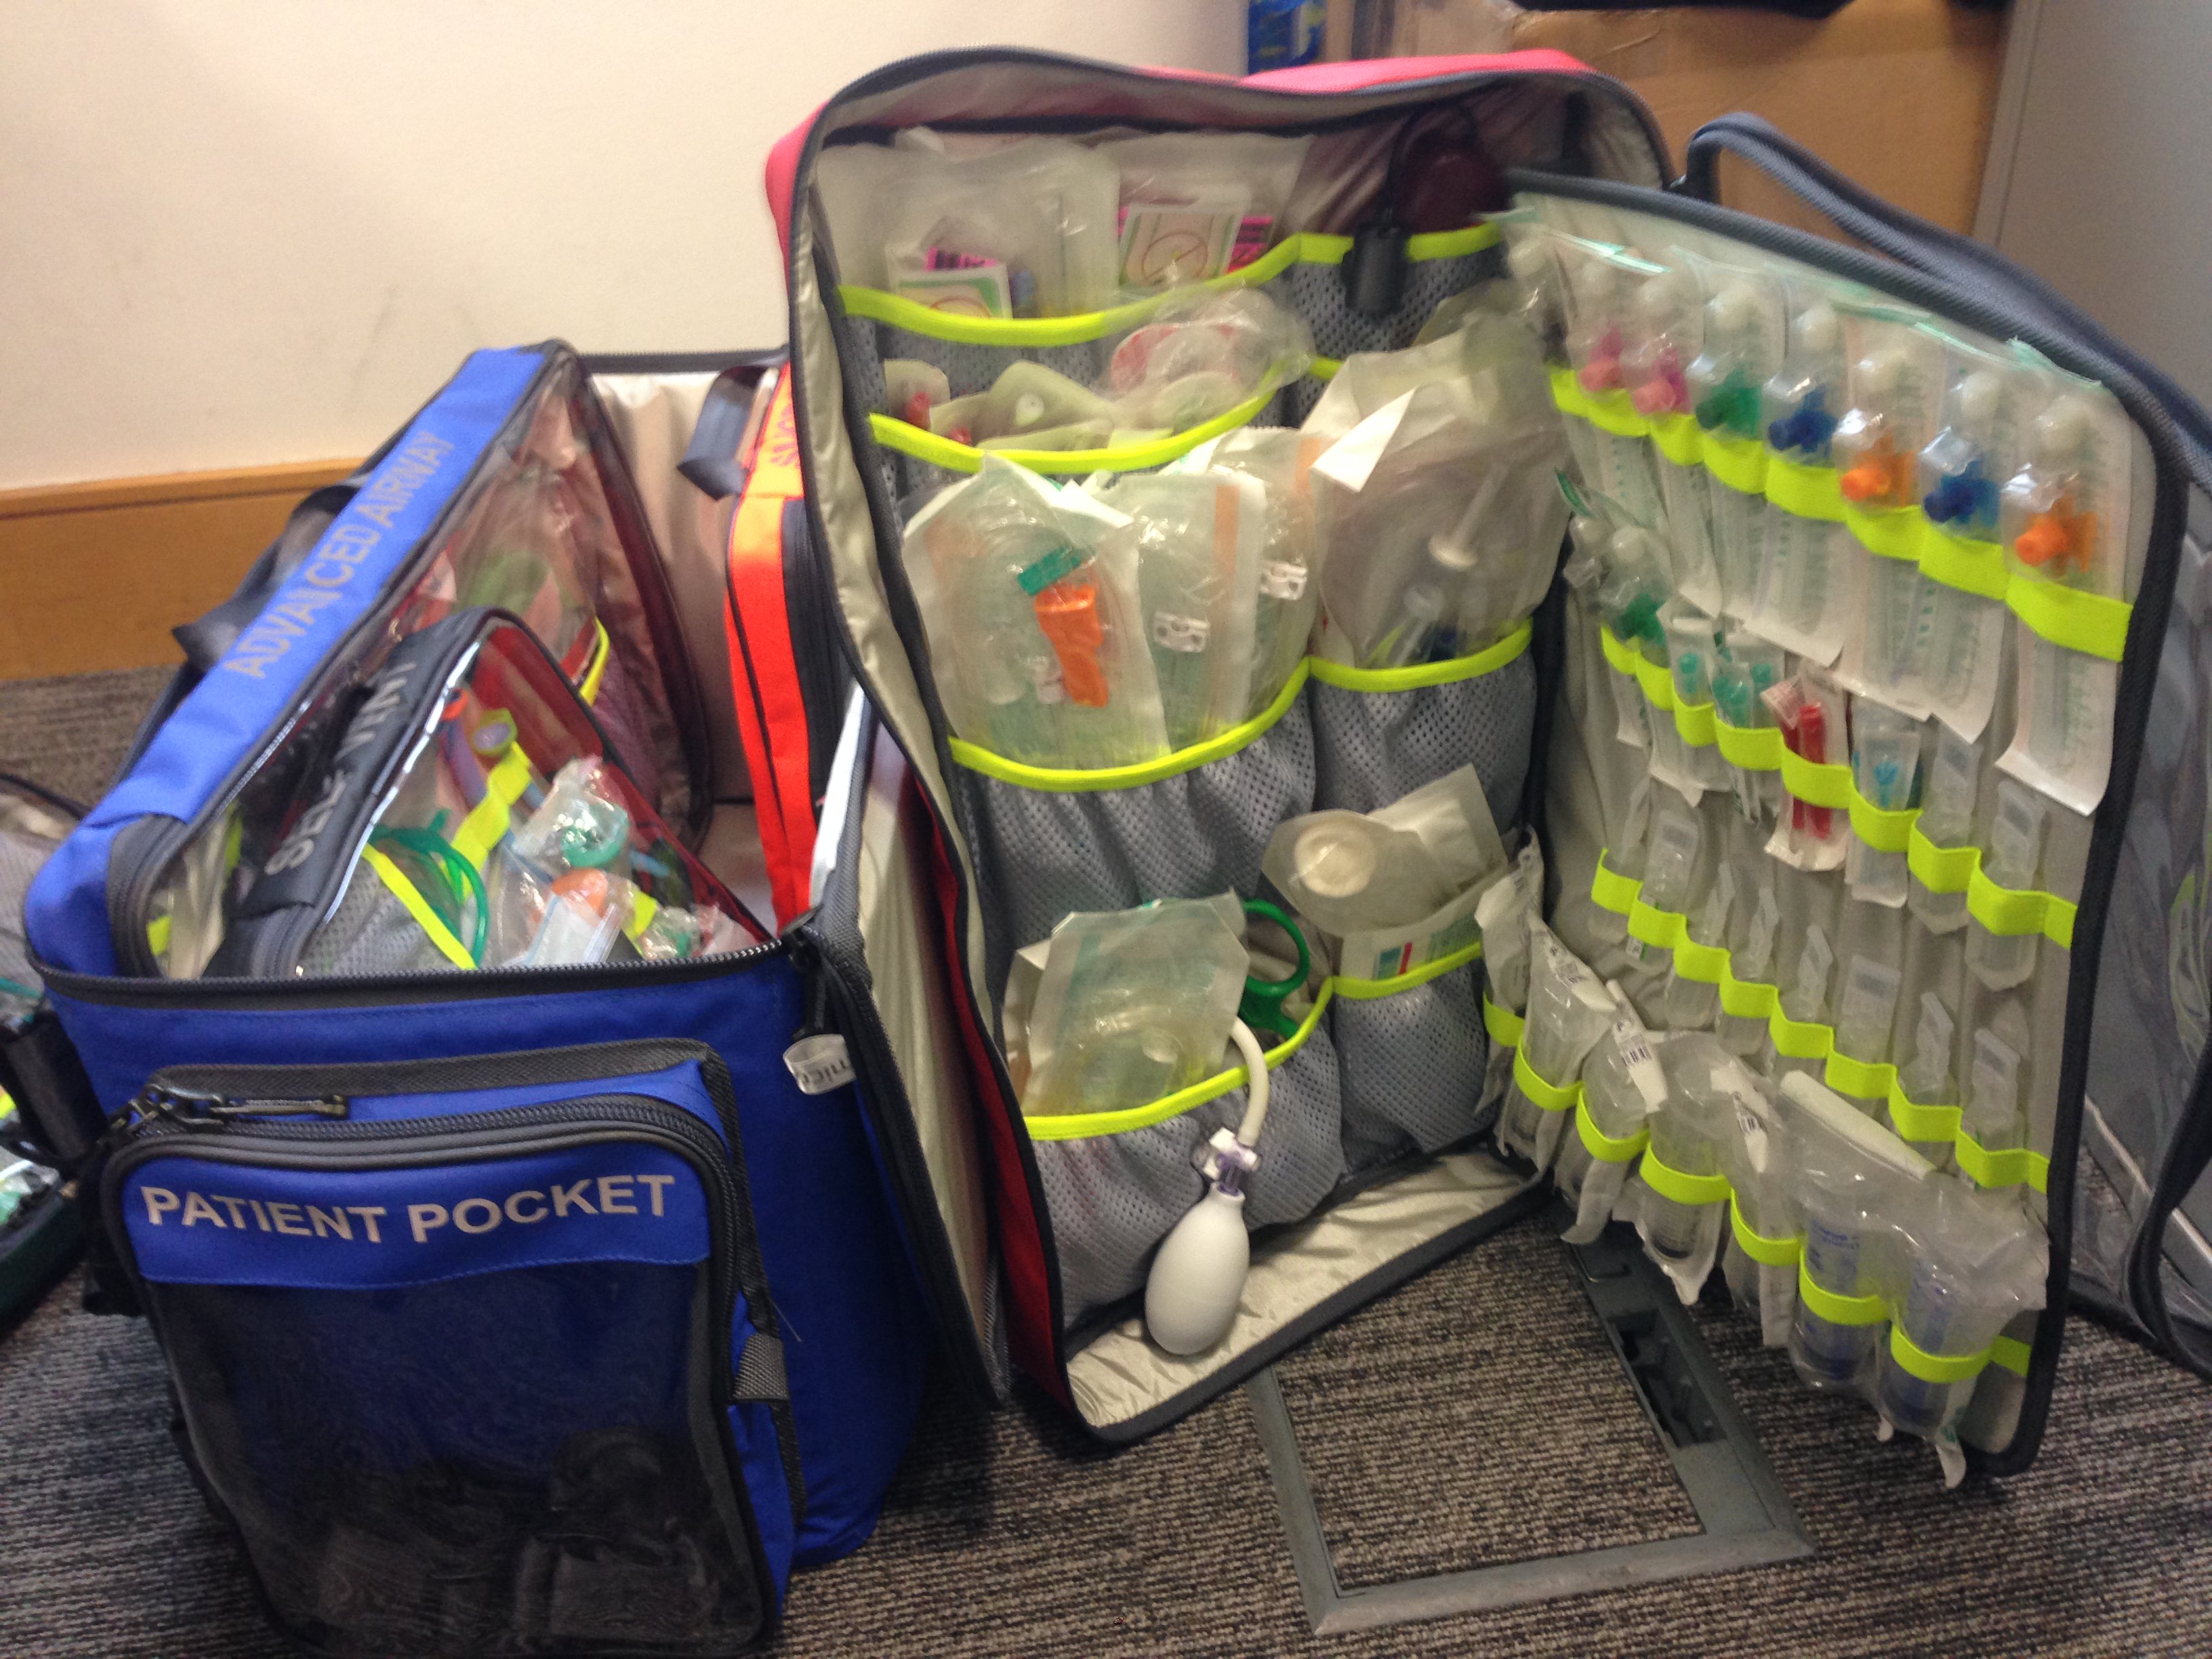 Patient Transfer Bag - Winner of a National Patient Safety Award featured image